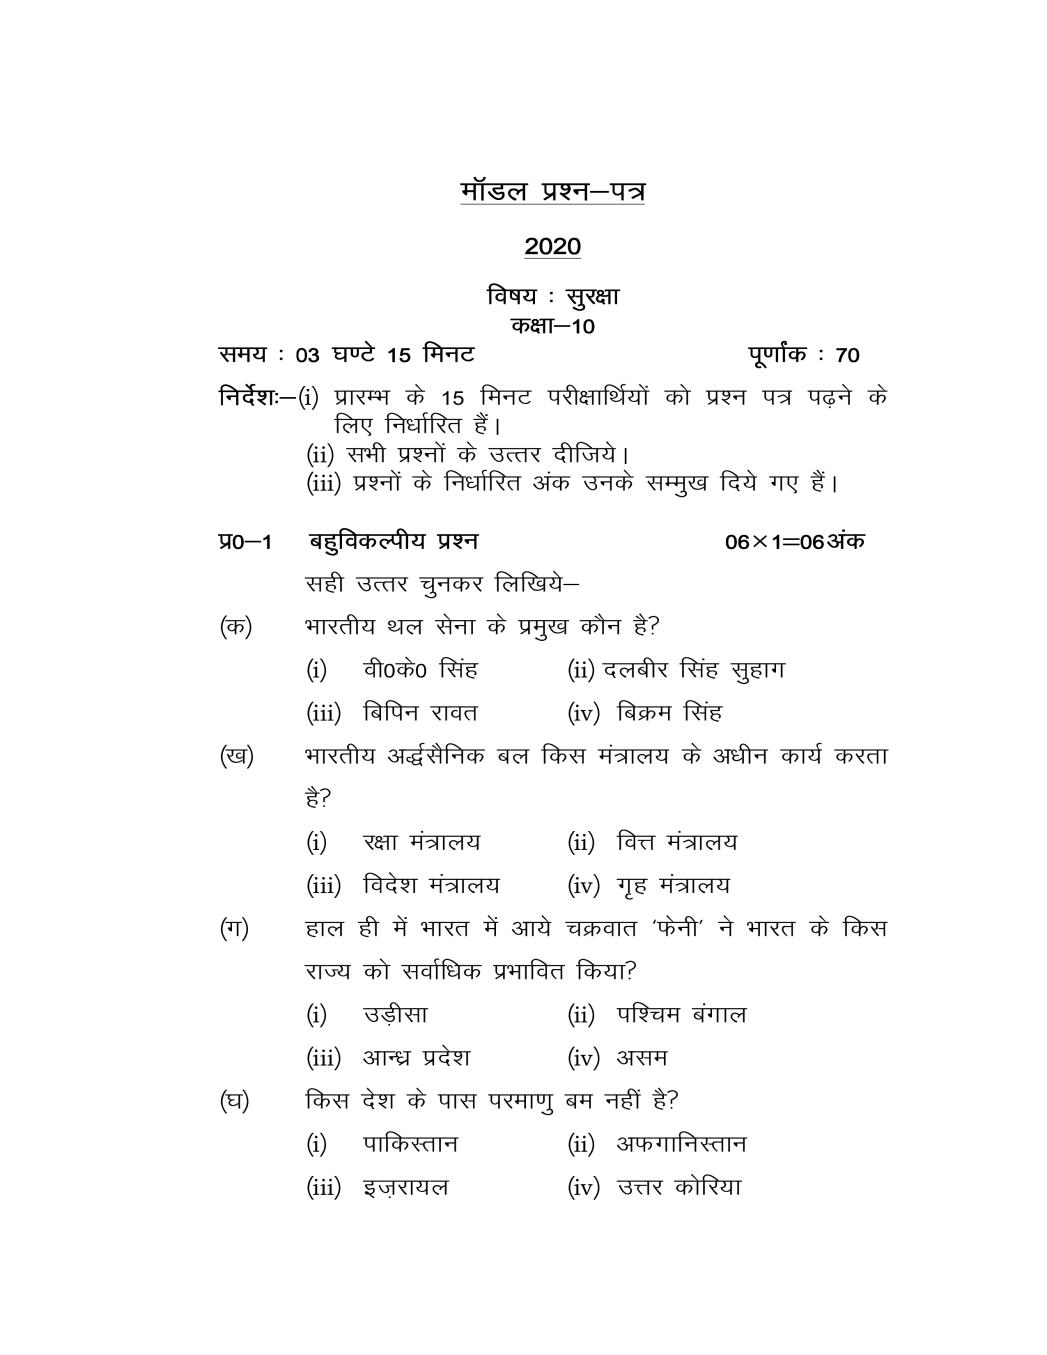 UP Board Class 10 Model Question Paper 2020 Security - Page 1